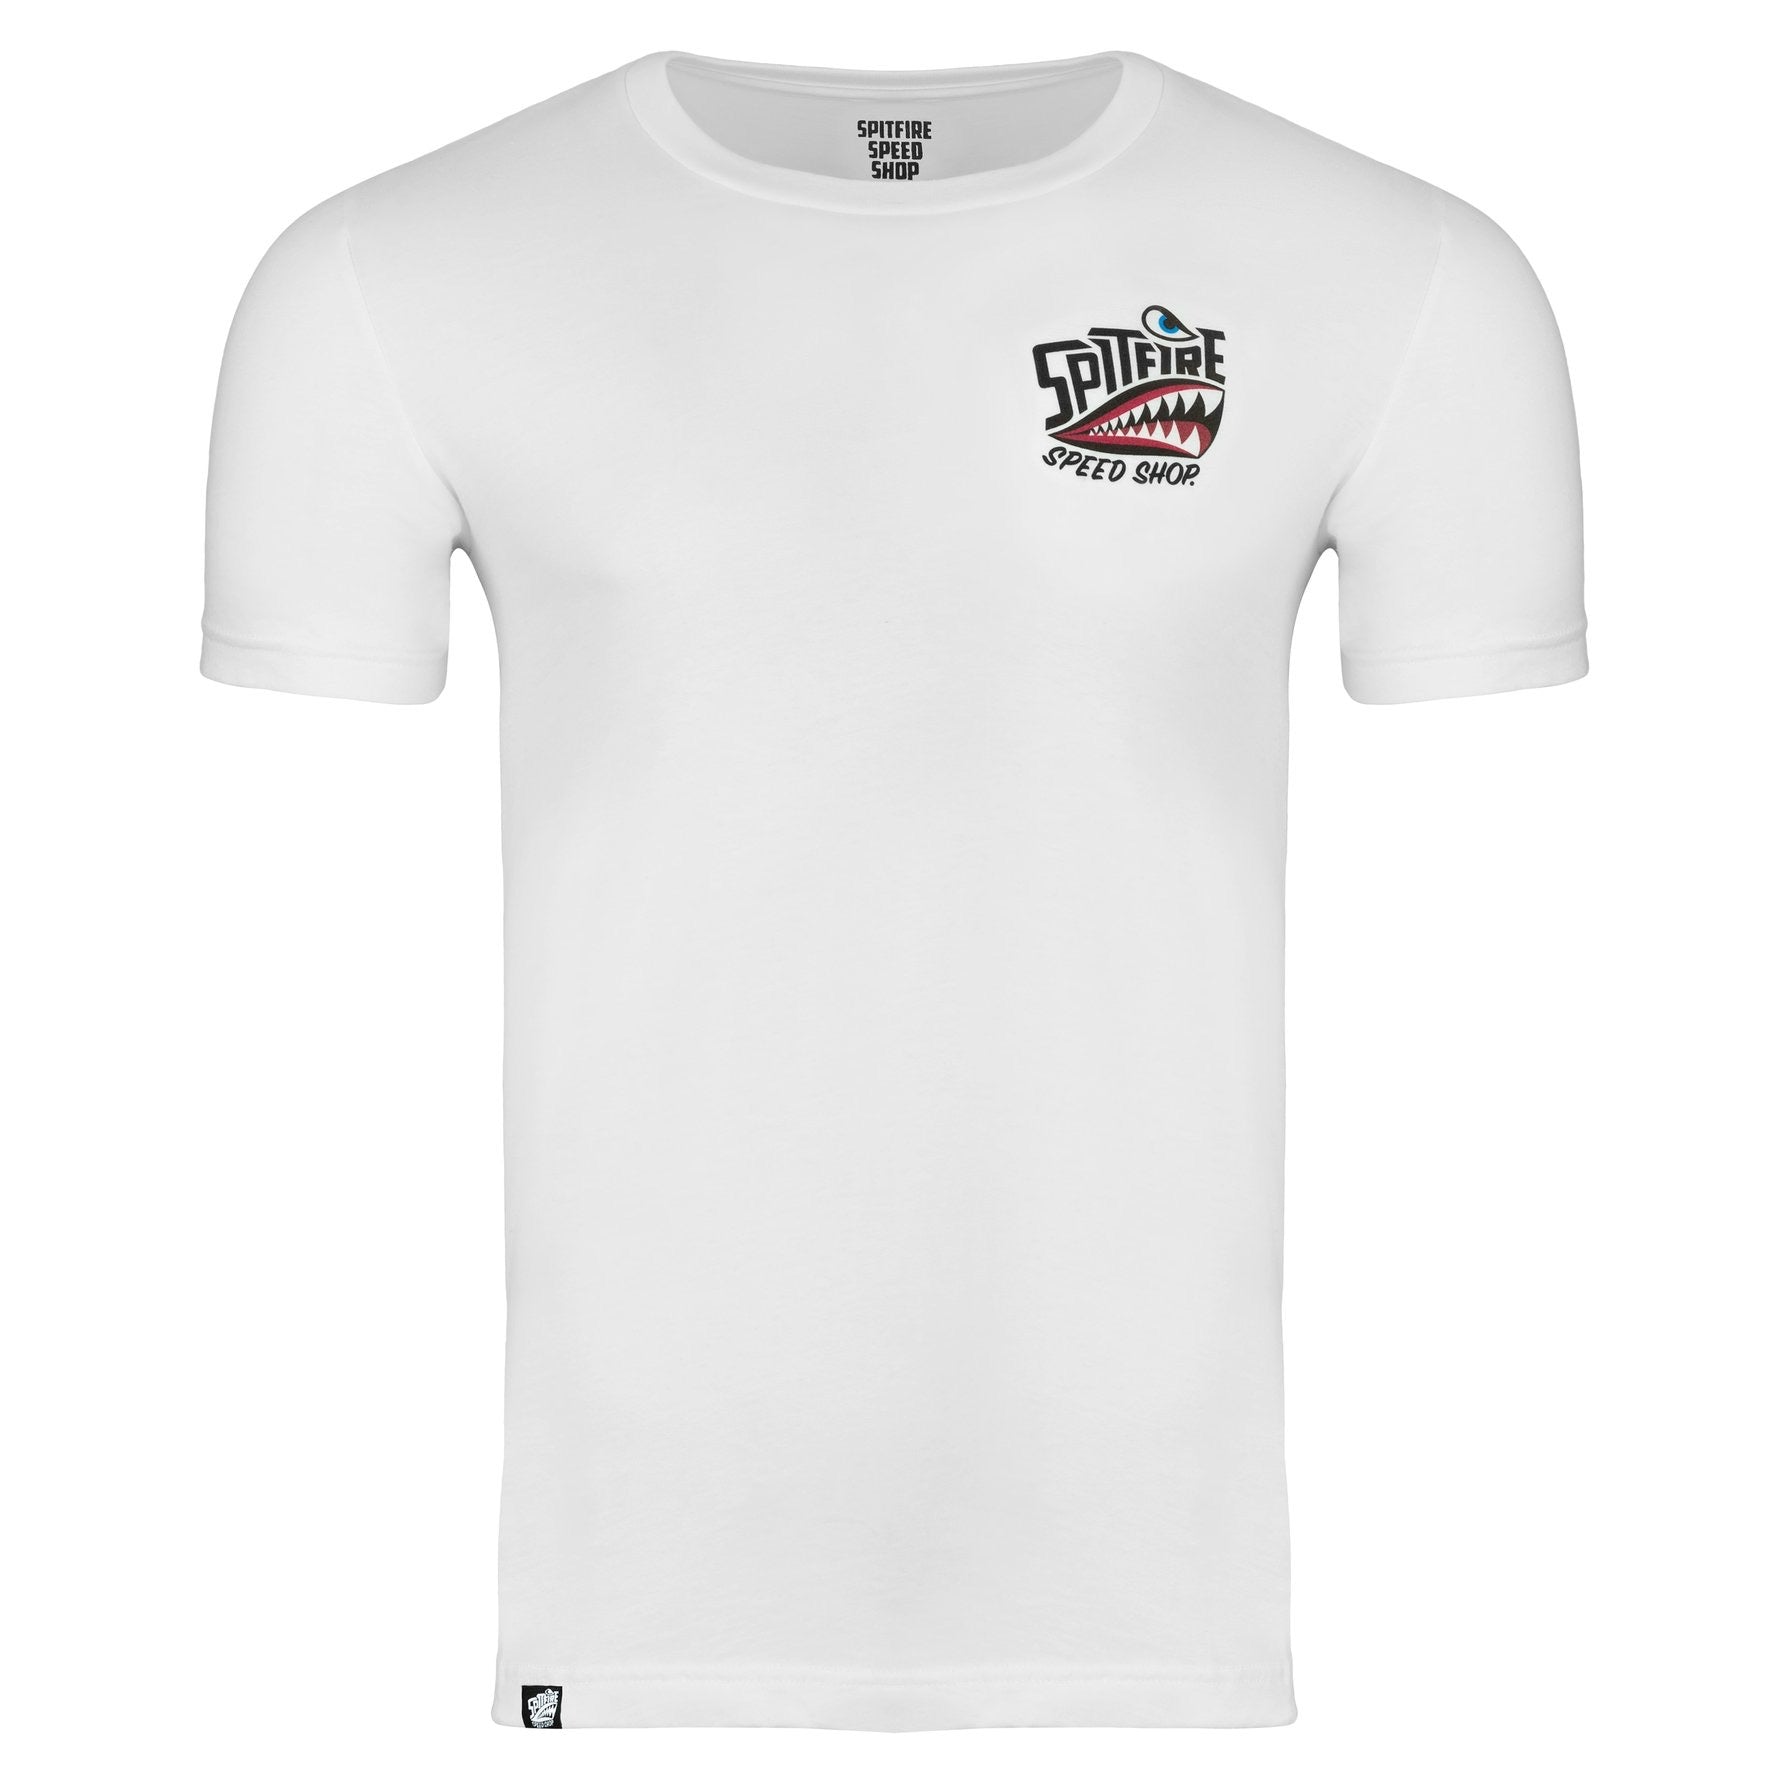 White Spitfire Speed Shop T- shirt with front left pocket small full colour logo